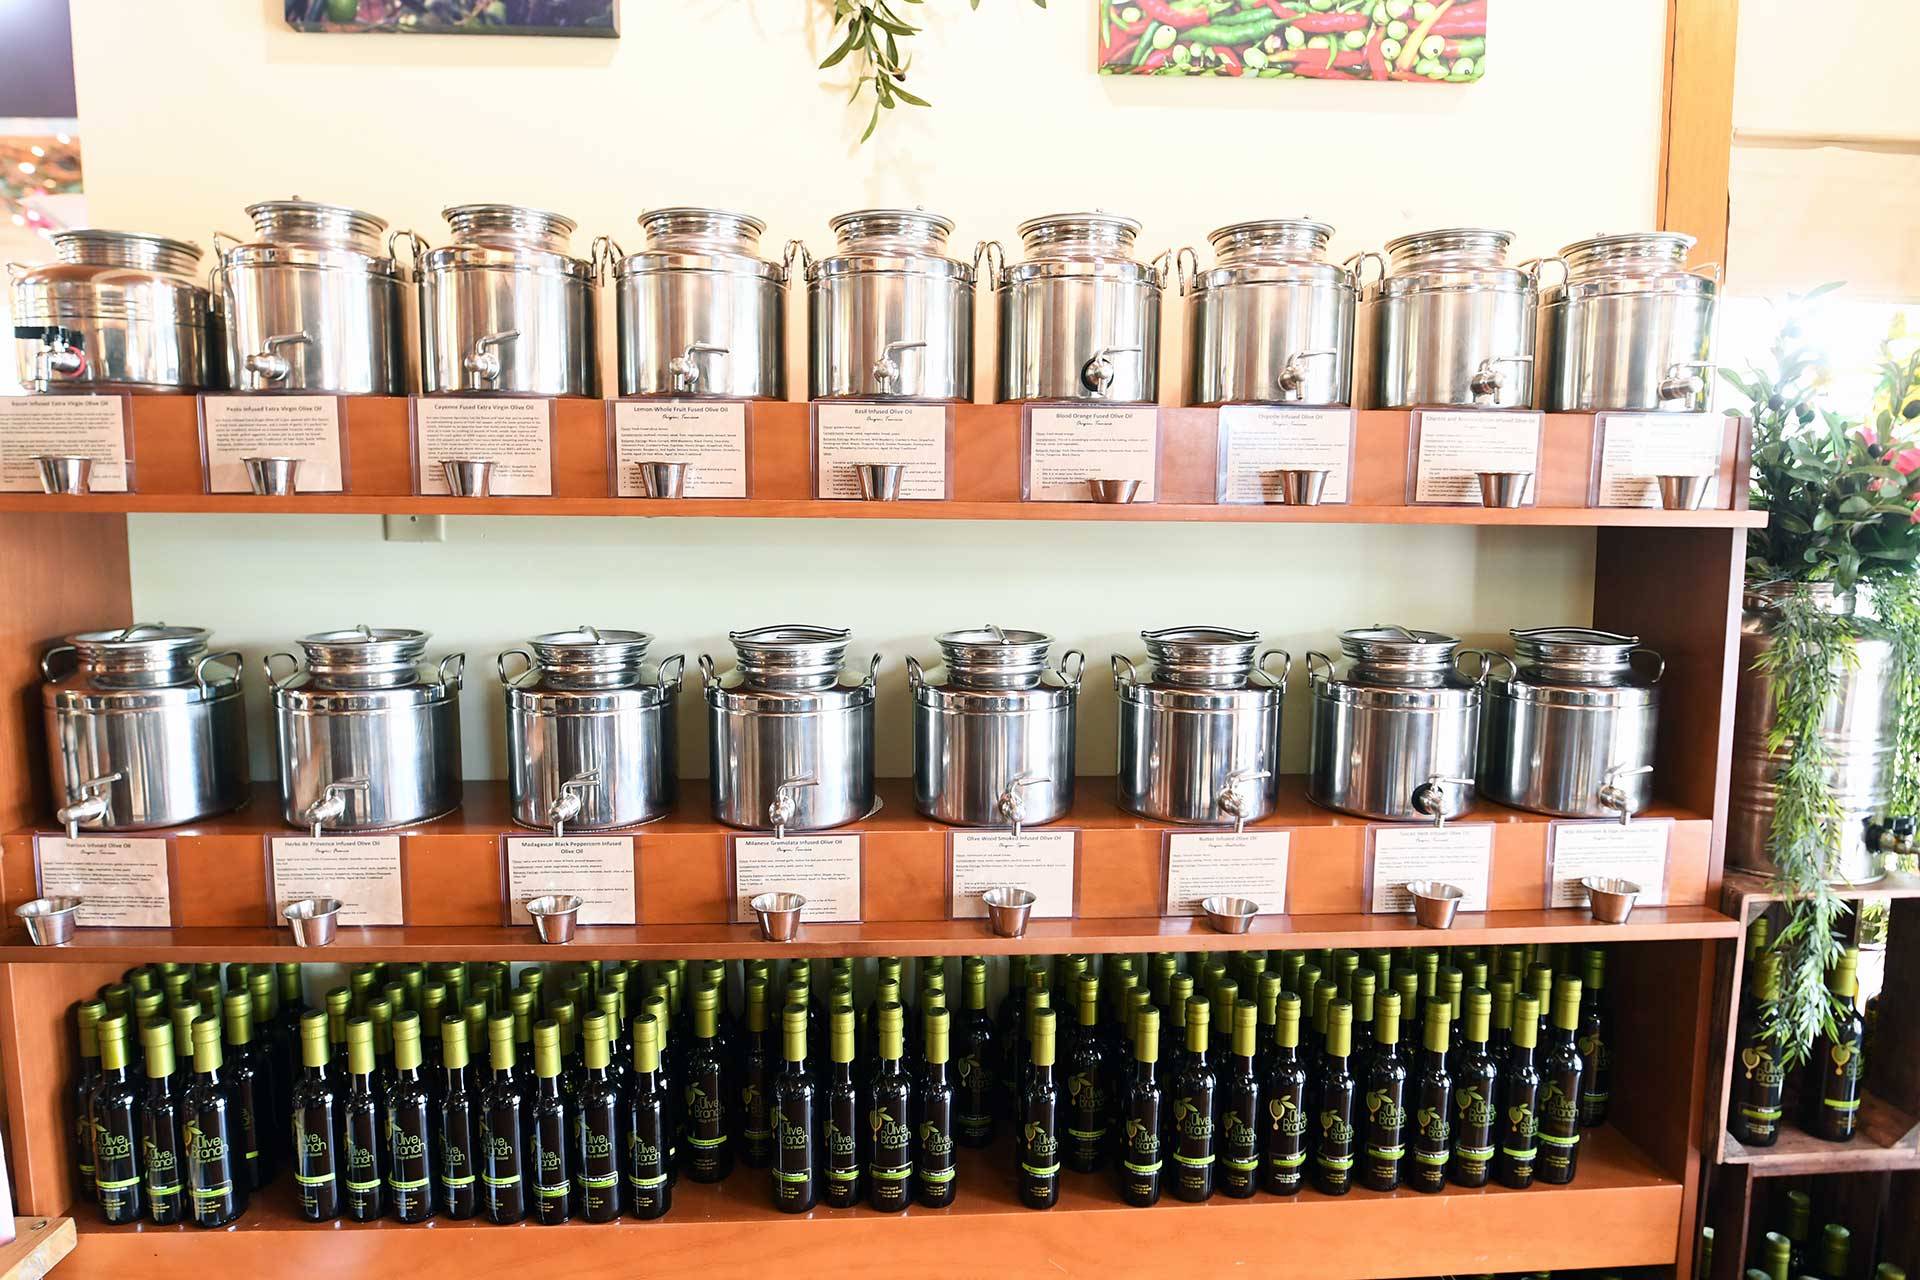 Interior of The Olive Branch olive oil display and dispensers